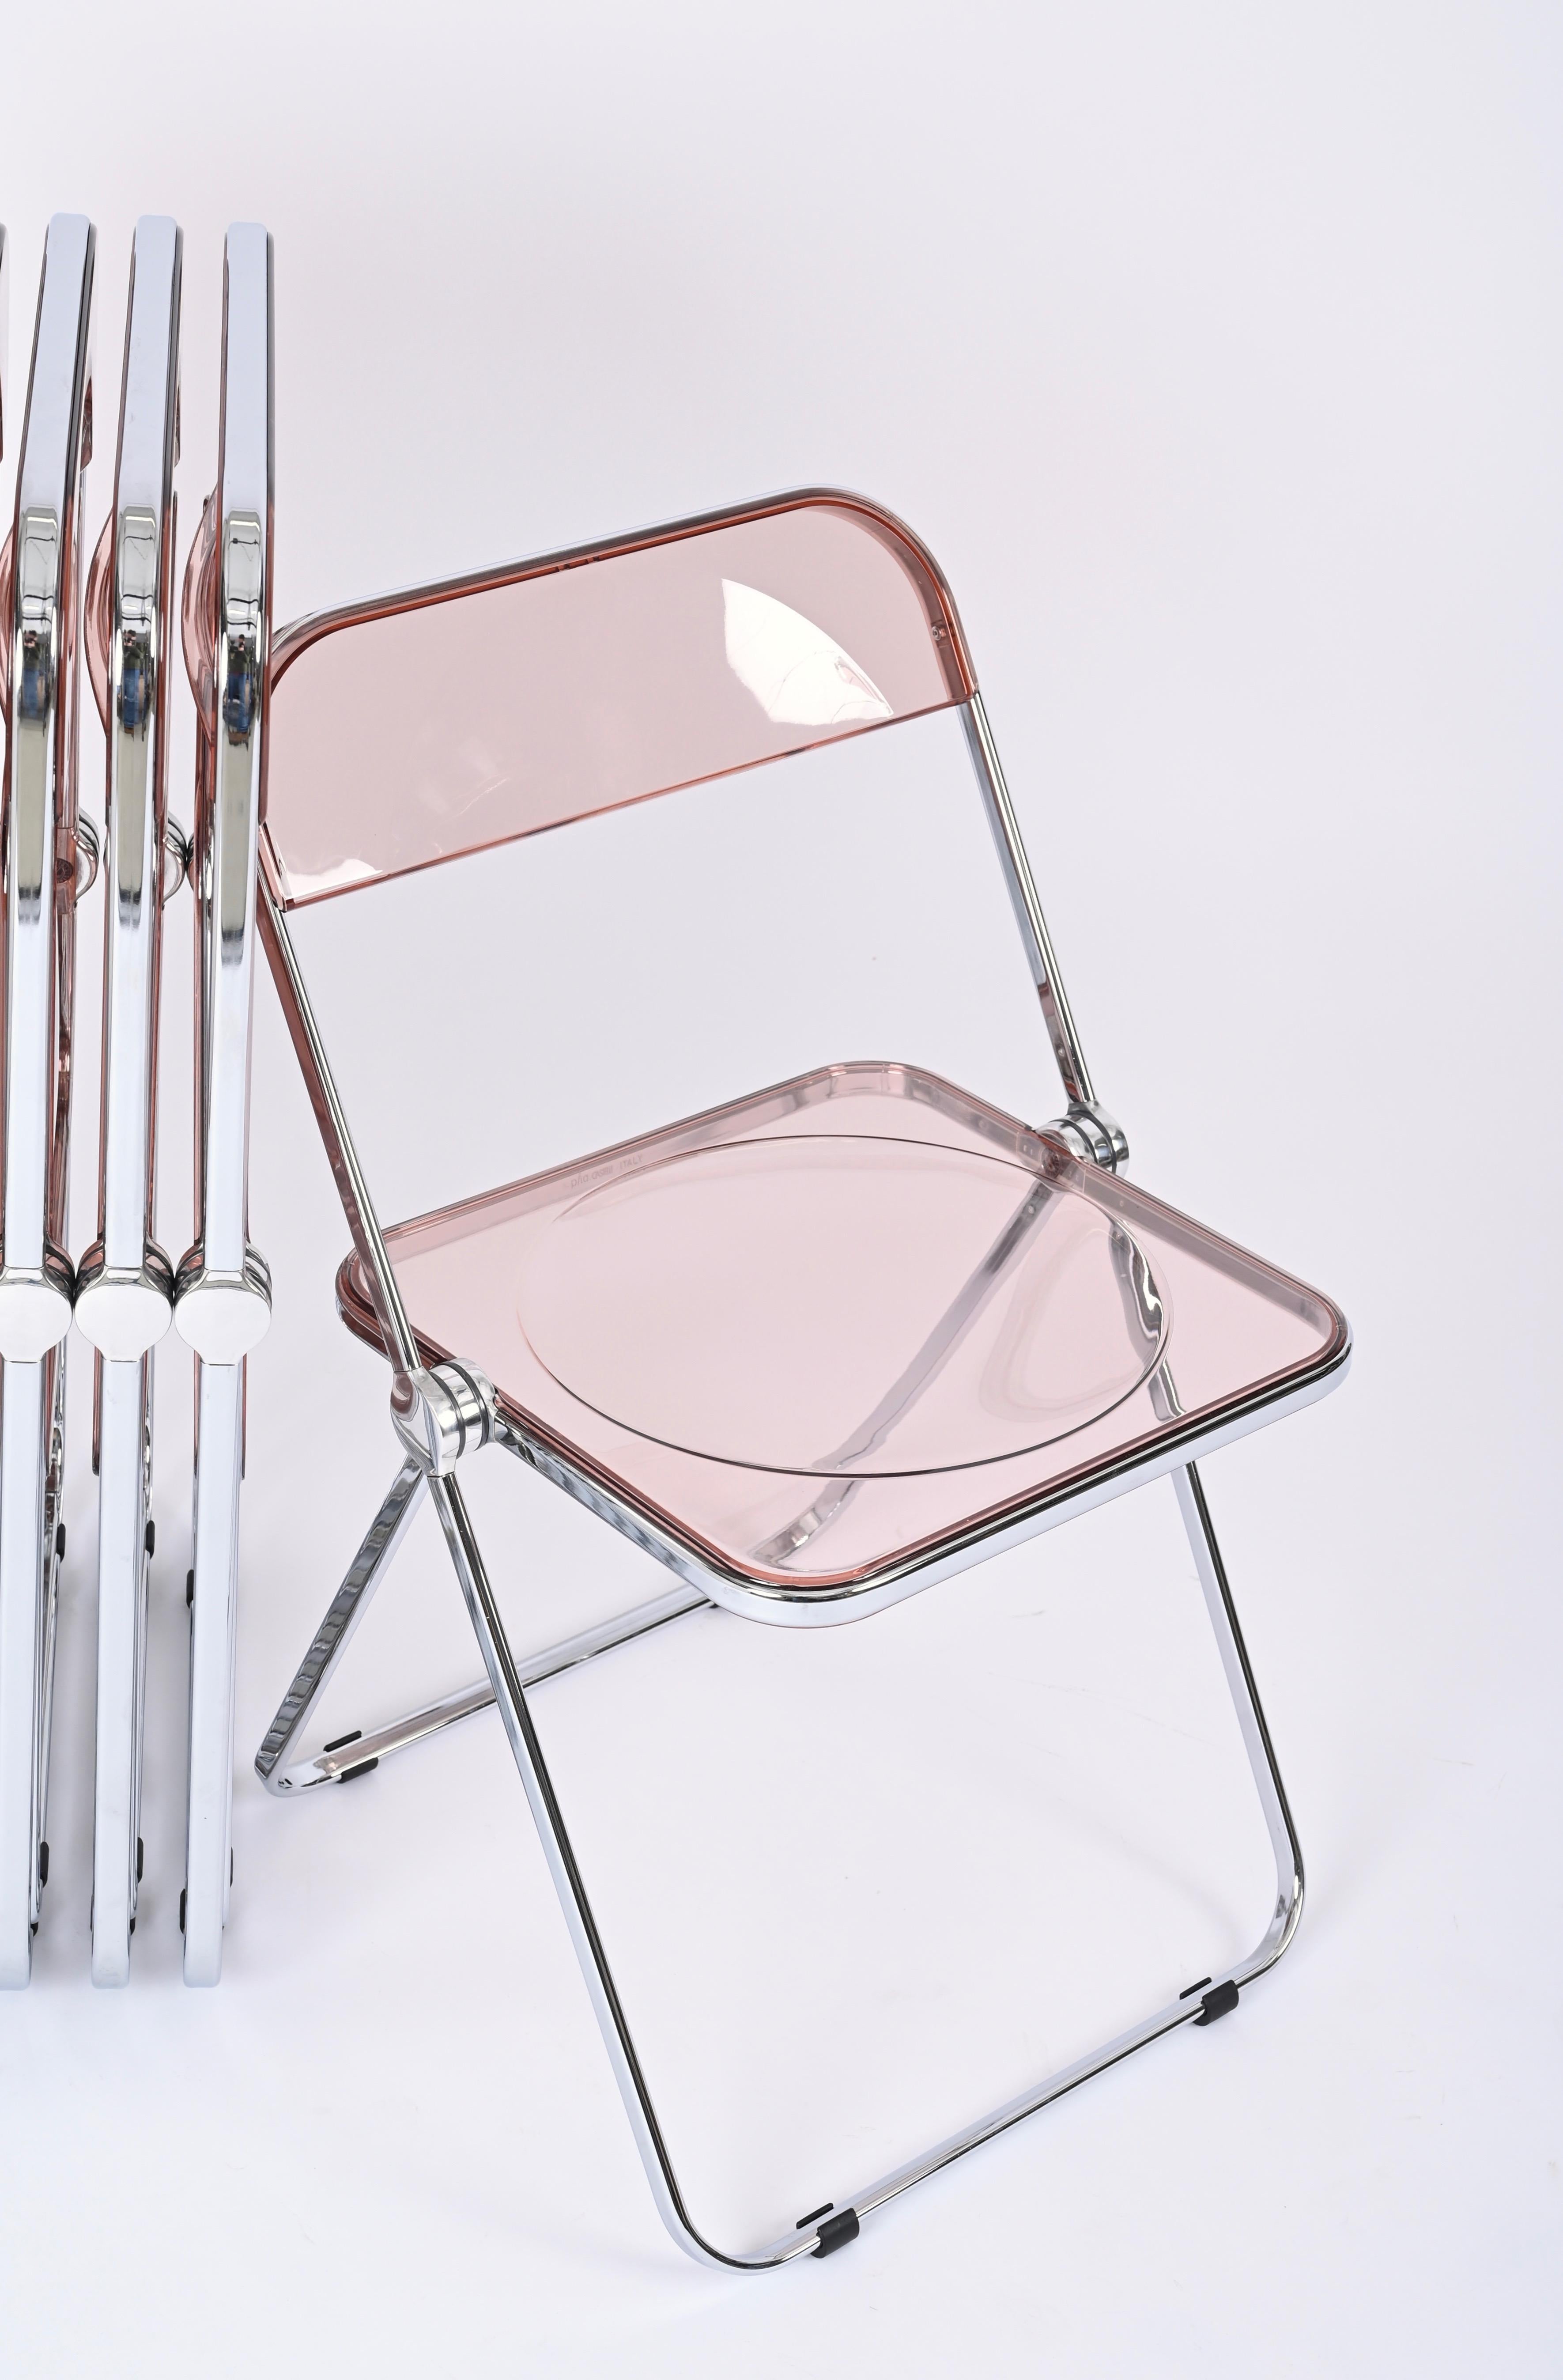 Steel Set of 4 Lucite Pink and Chrome Plia Chairs, Piretti for Castelli, Italy 1970s For Sale